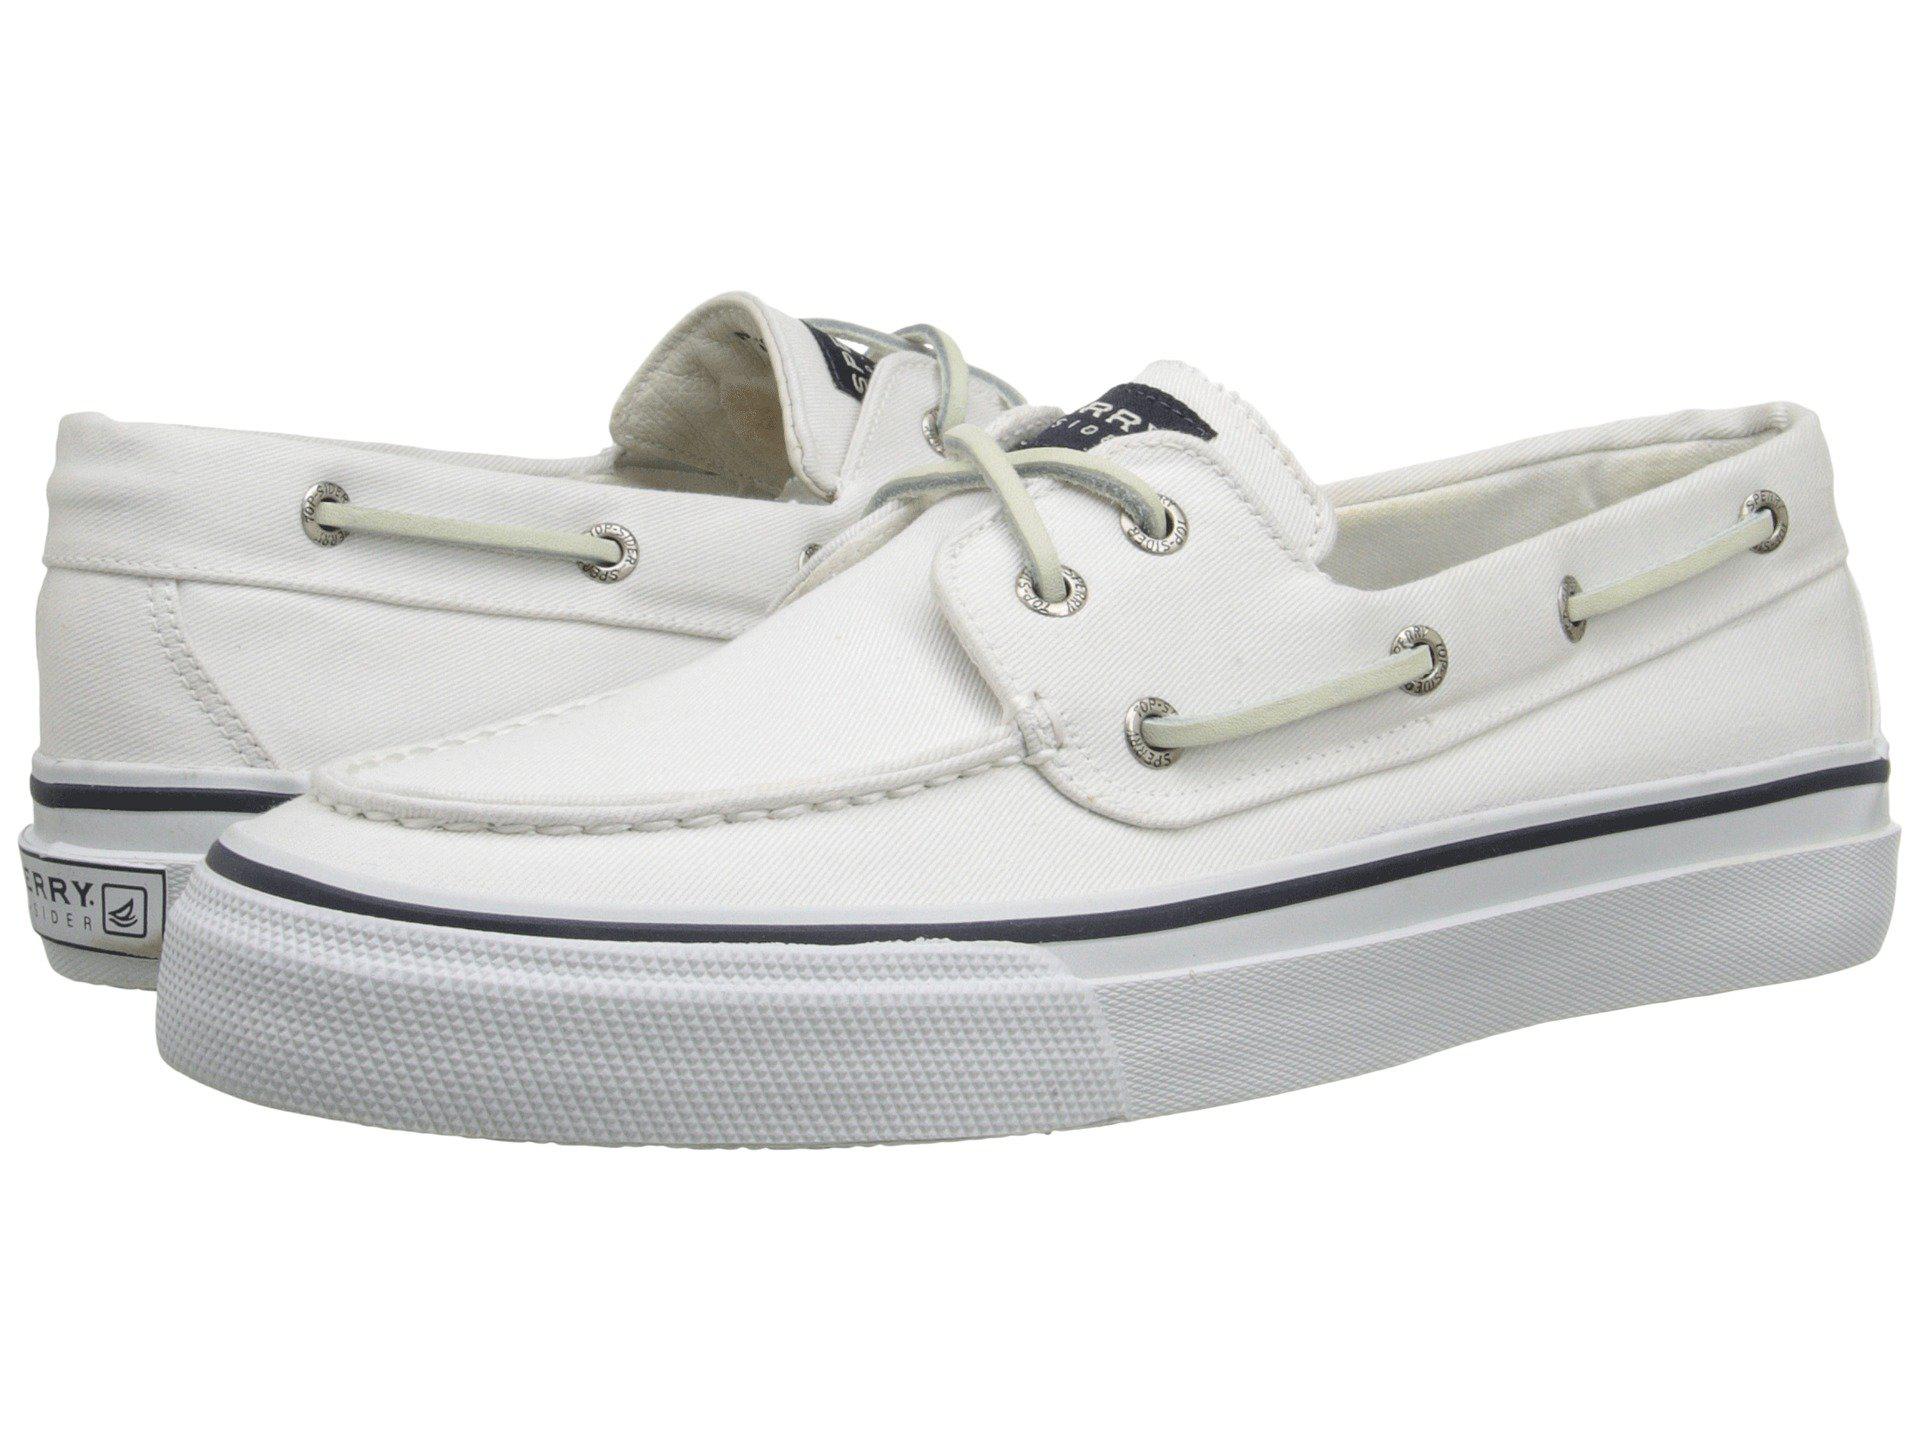 Lyst - Sperry Top-Sider Bahama Lace in White for Men